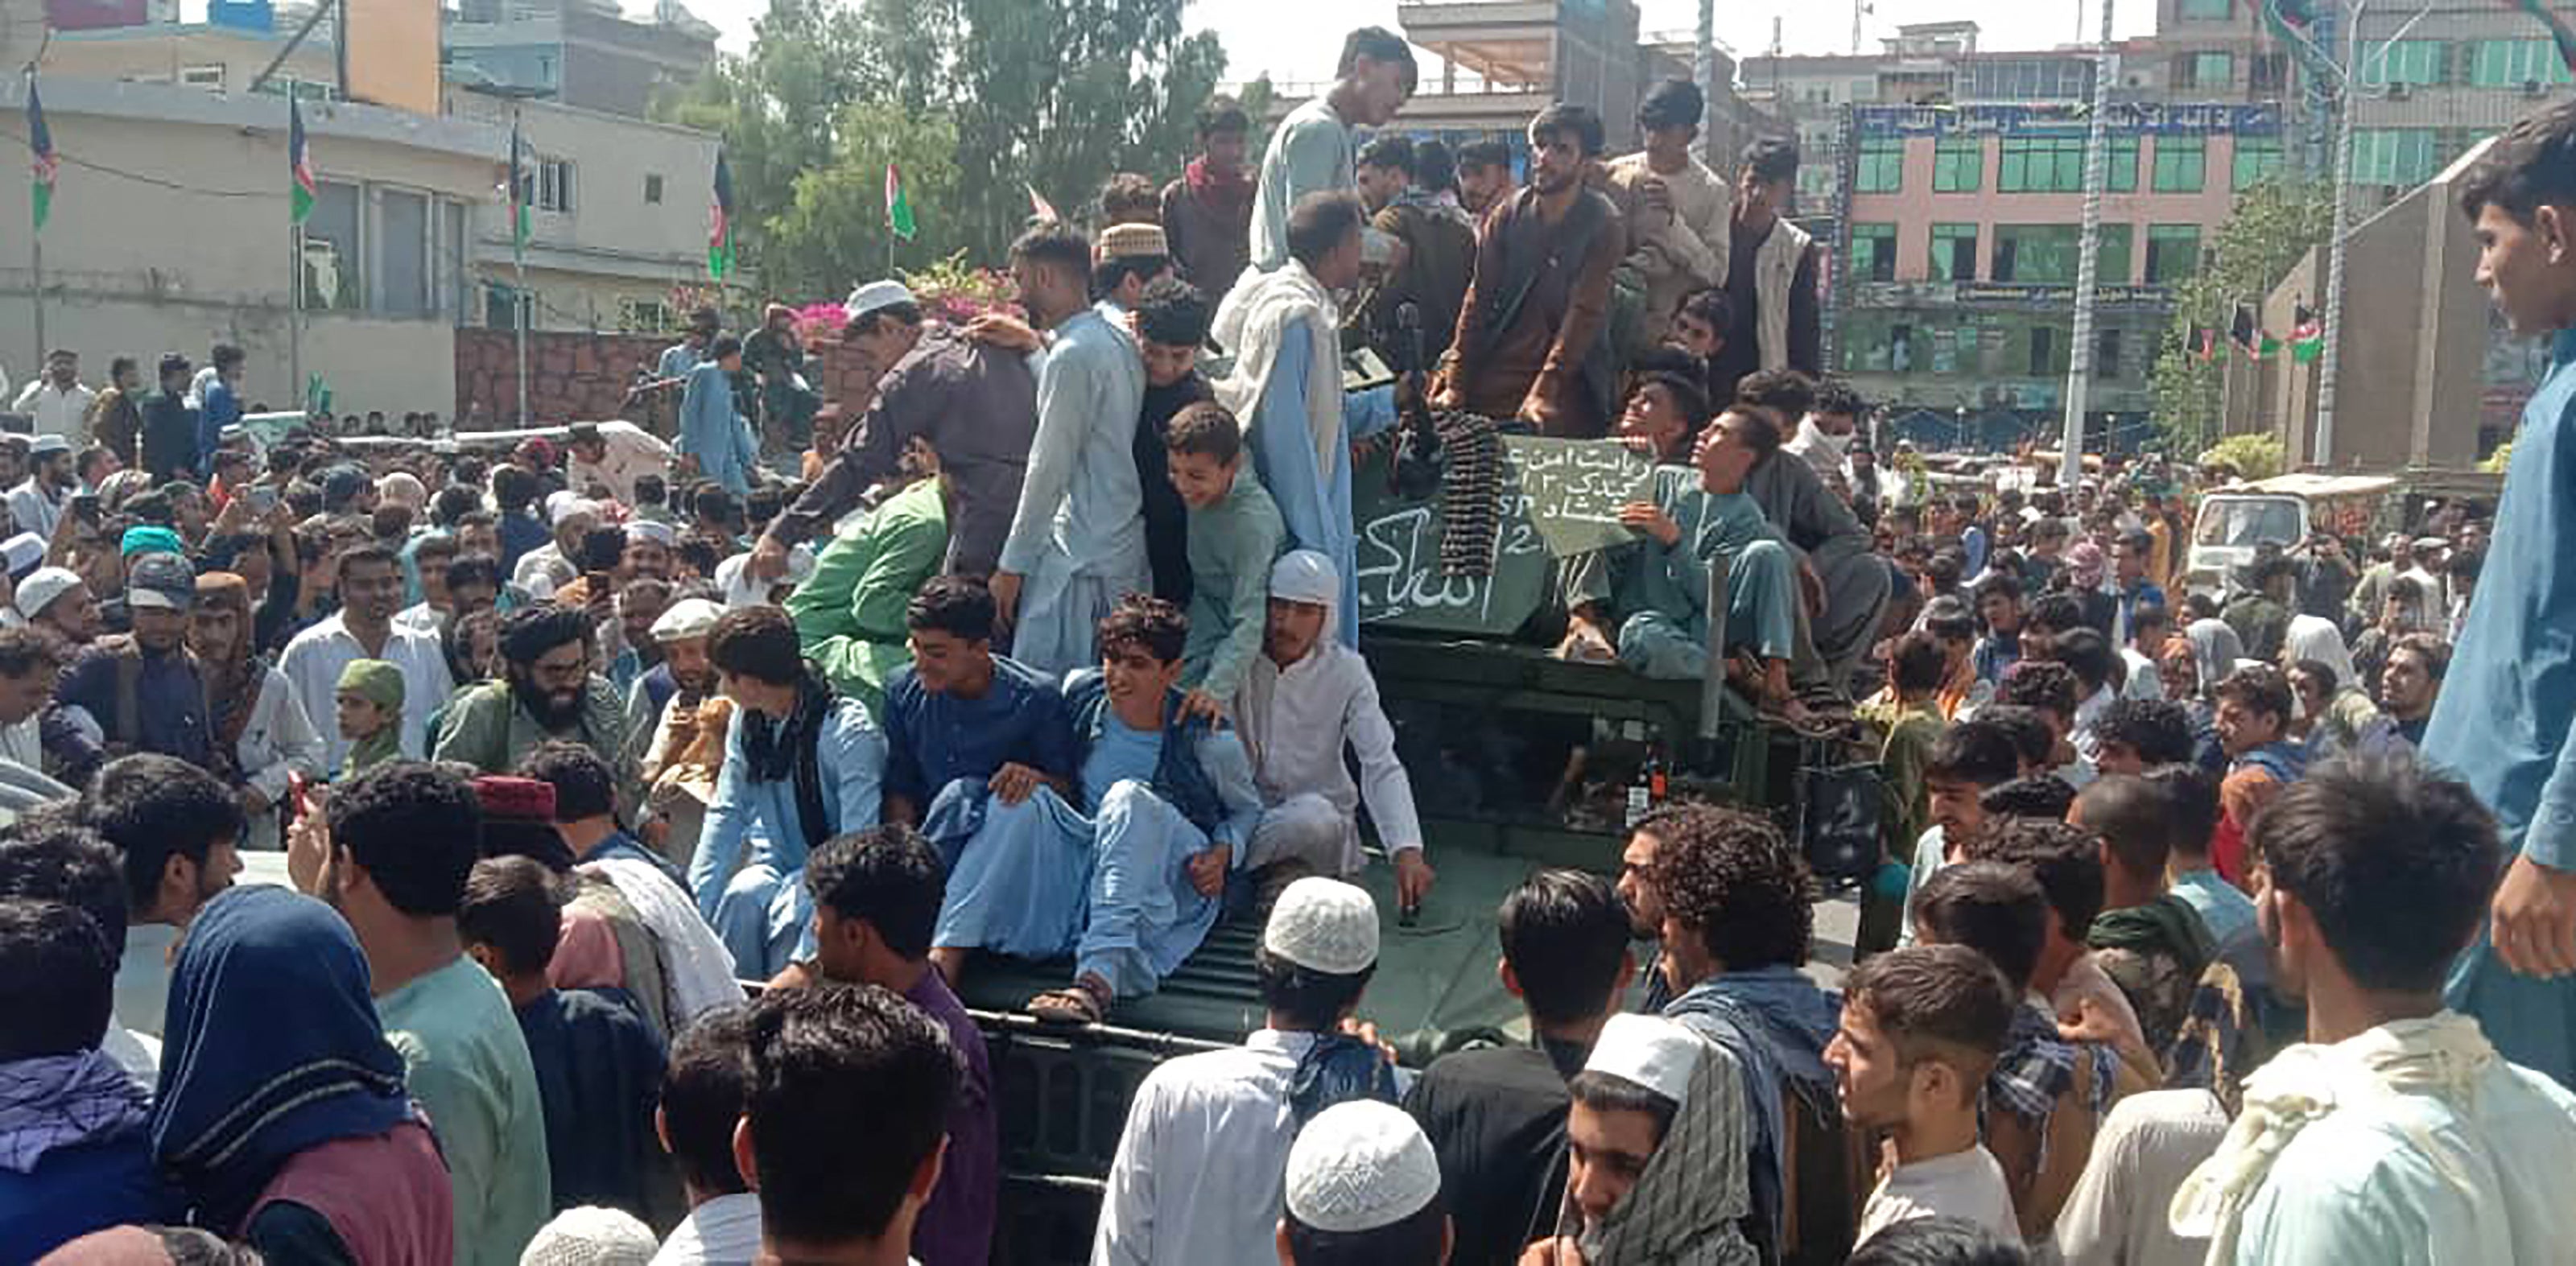 Taliban fighters and local people sit on an Afghan National Army humvee on a street in Jalalabad province on 15 August